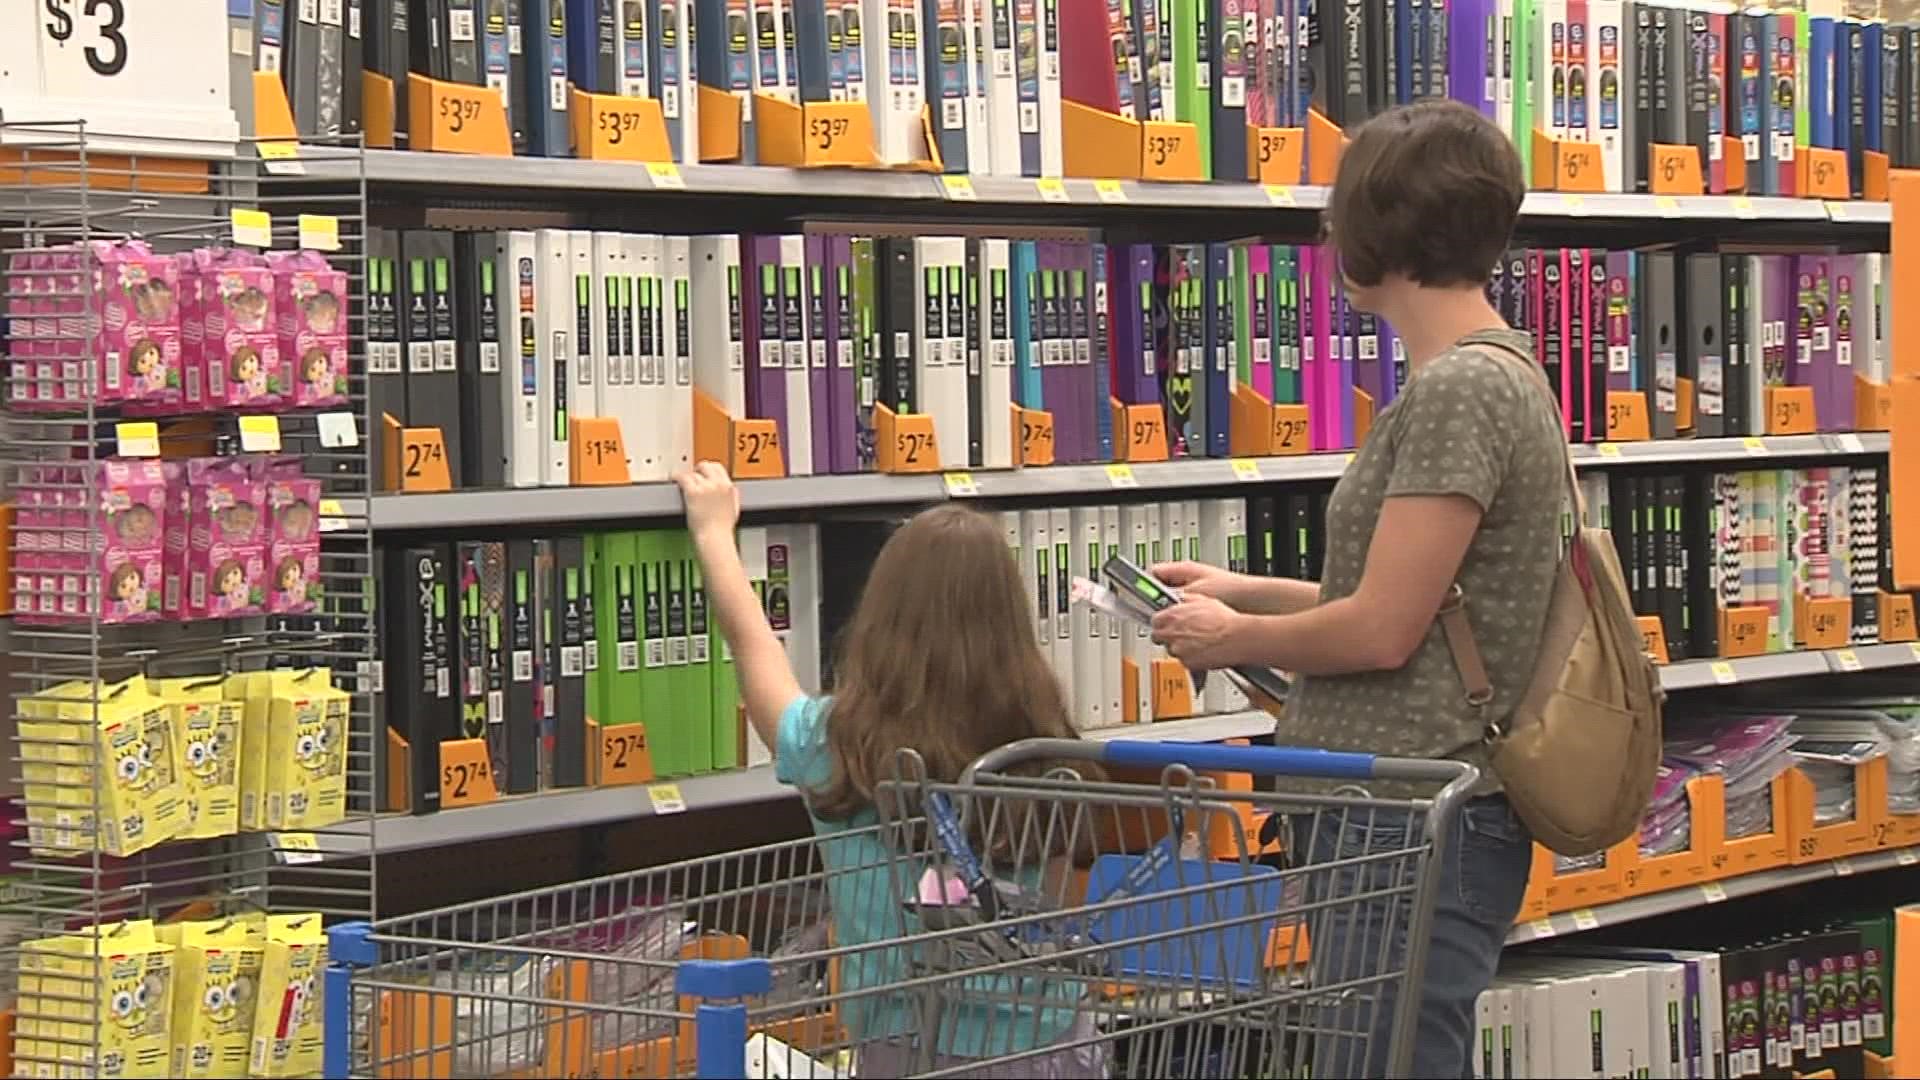 With back-to-school shopping on the horizon, Ohio's tax-free holiday this weekend could lessen inflation's impact for teachers and parents. Our Neil Fischer reports.